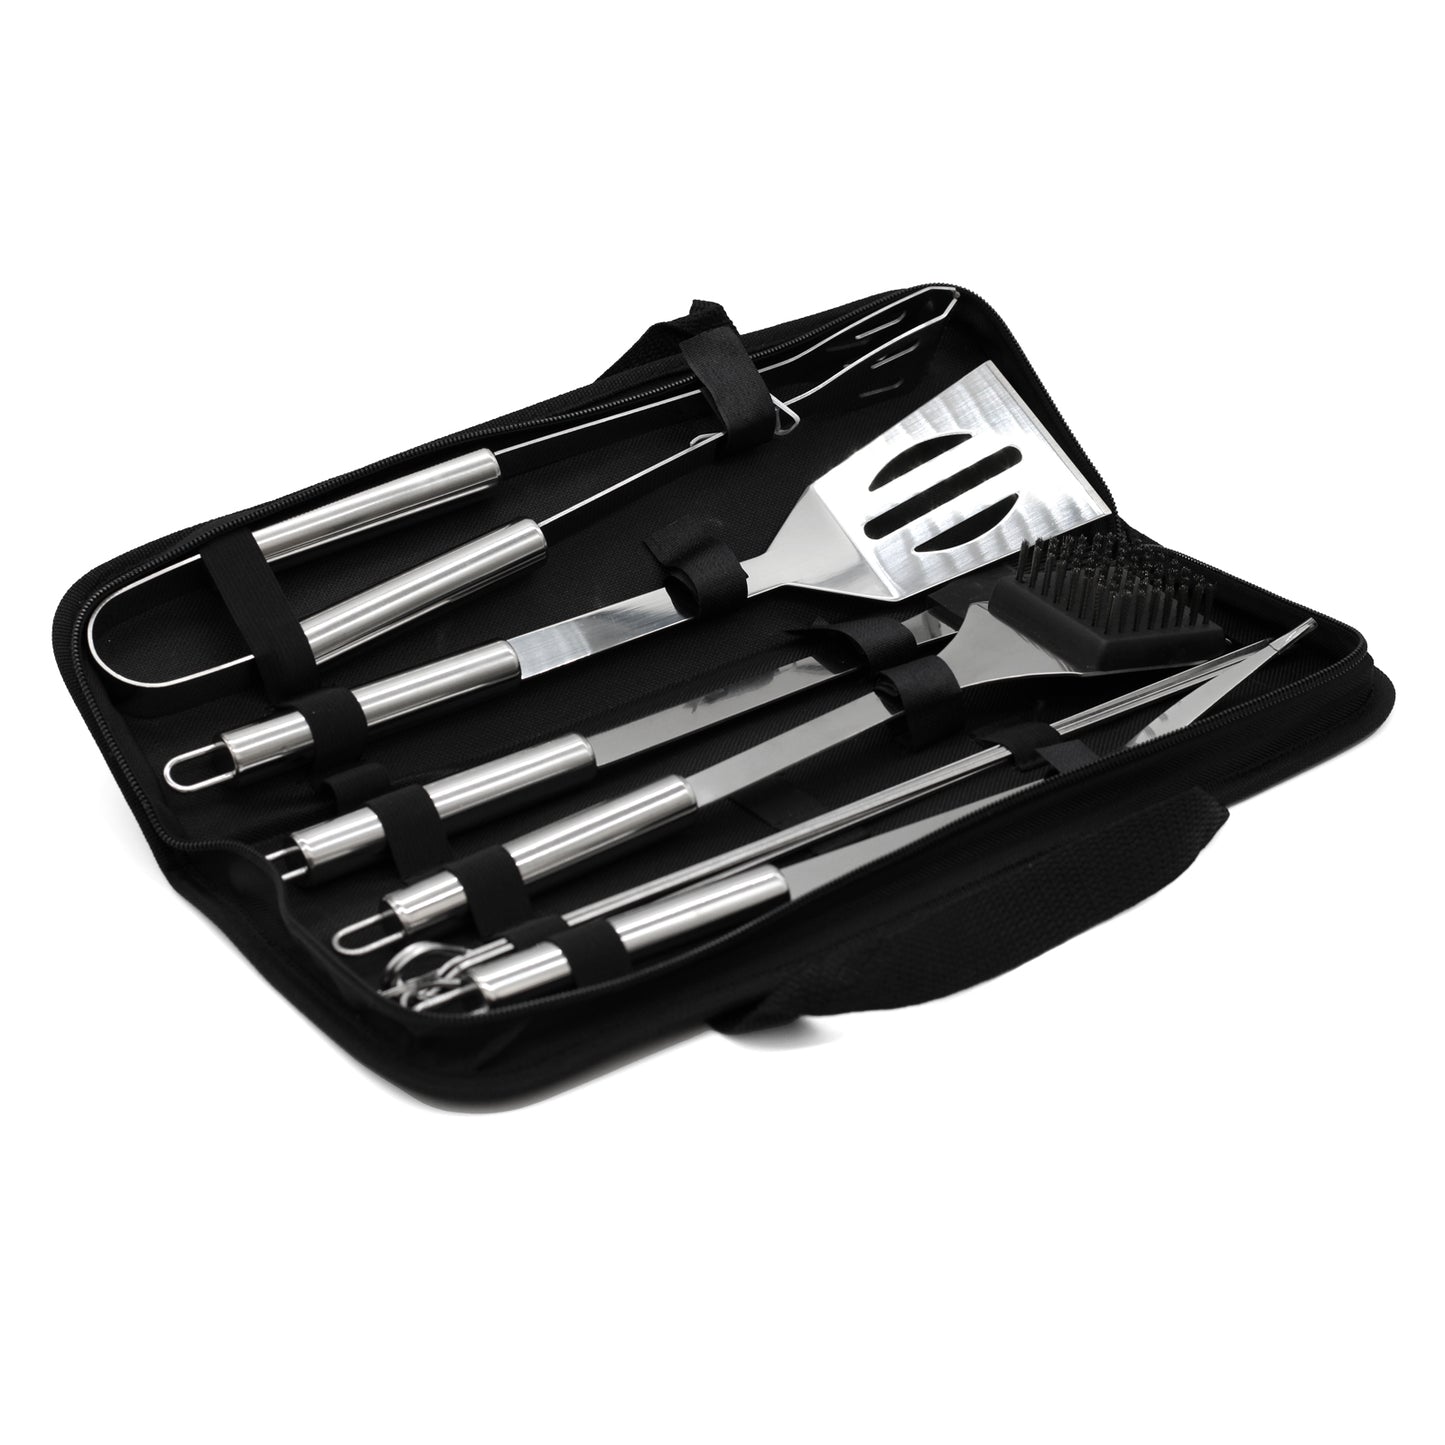 BBQ Tools inside carry case